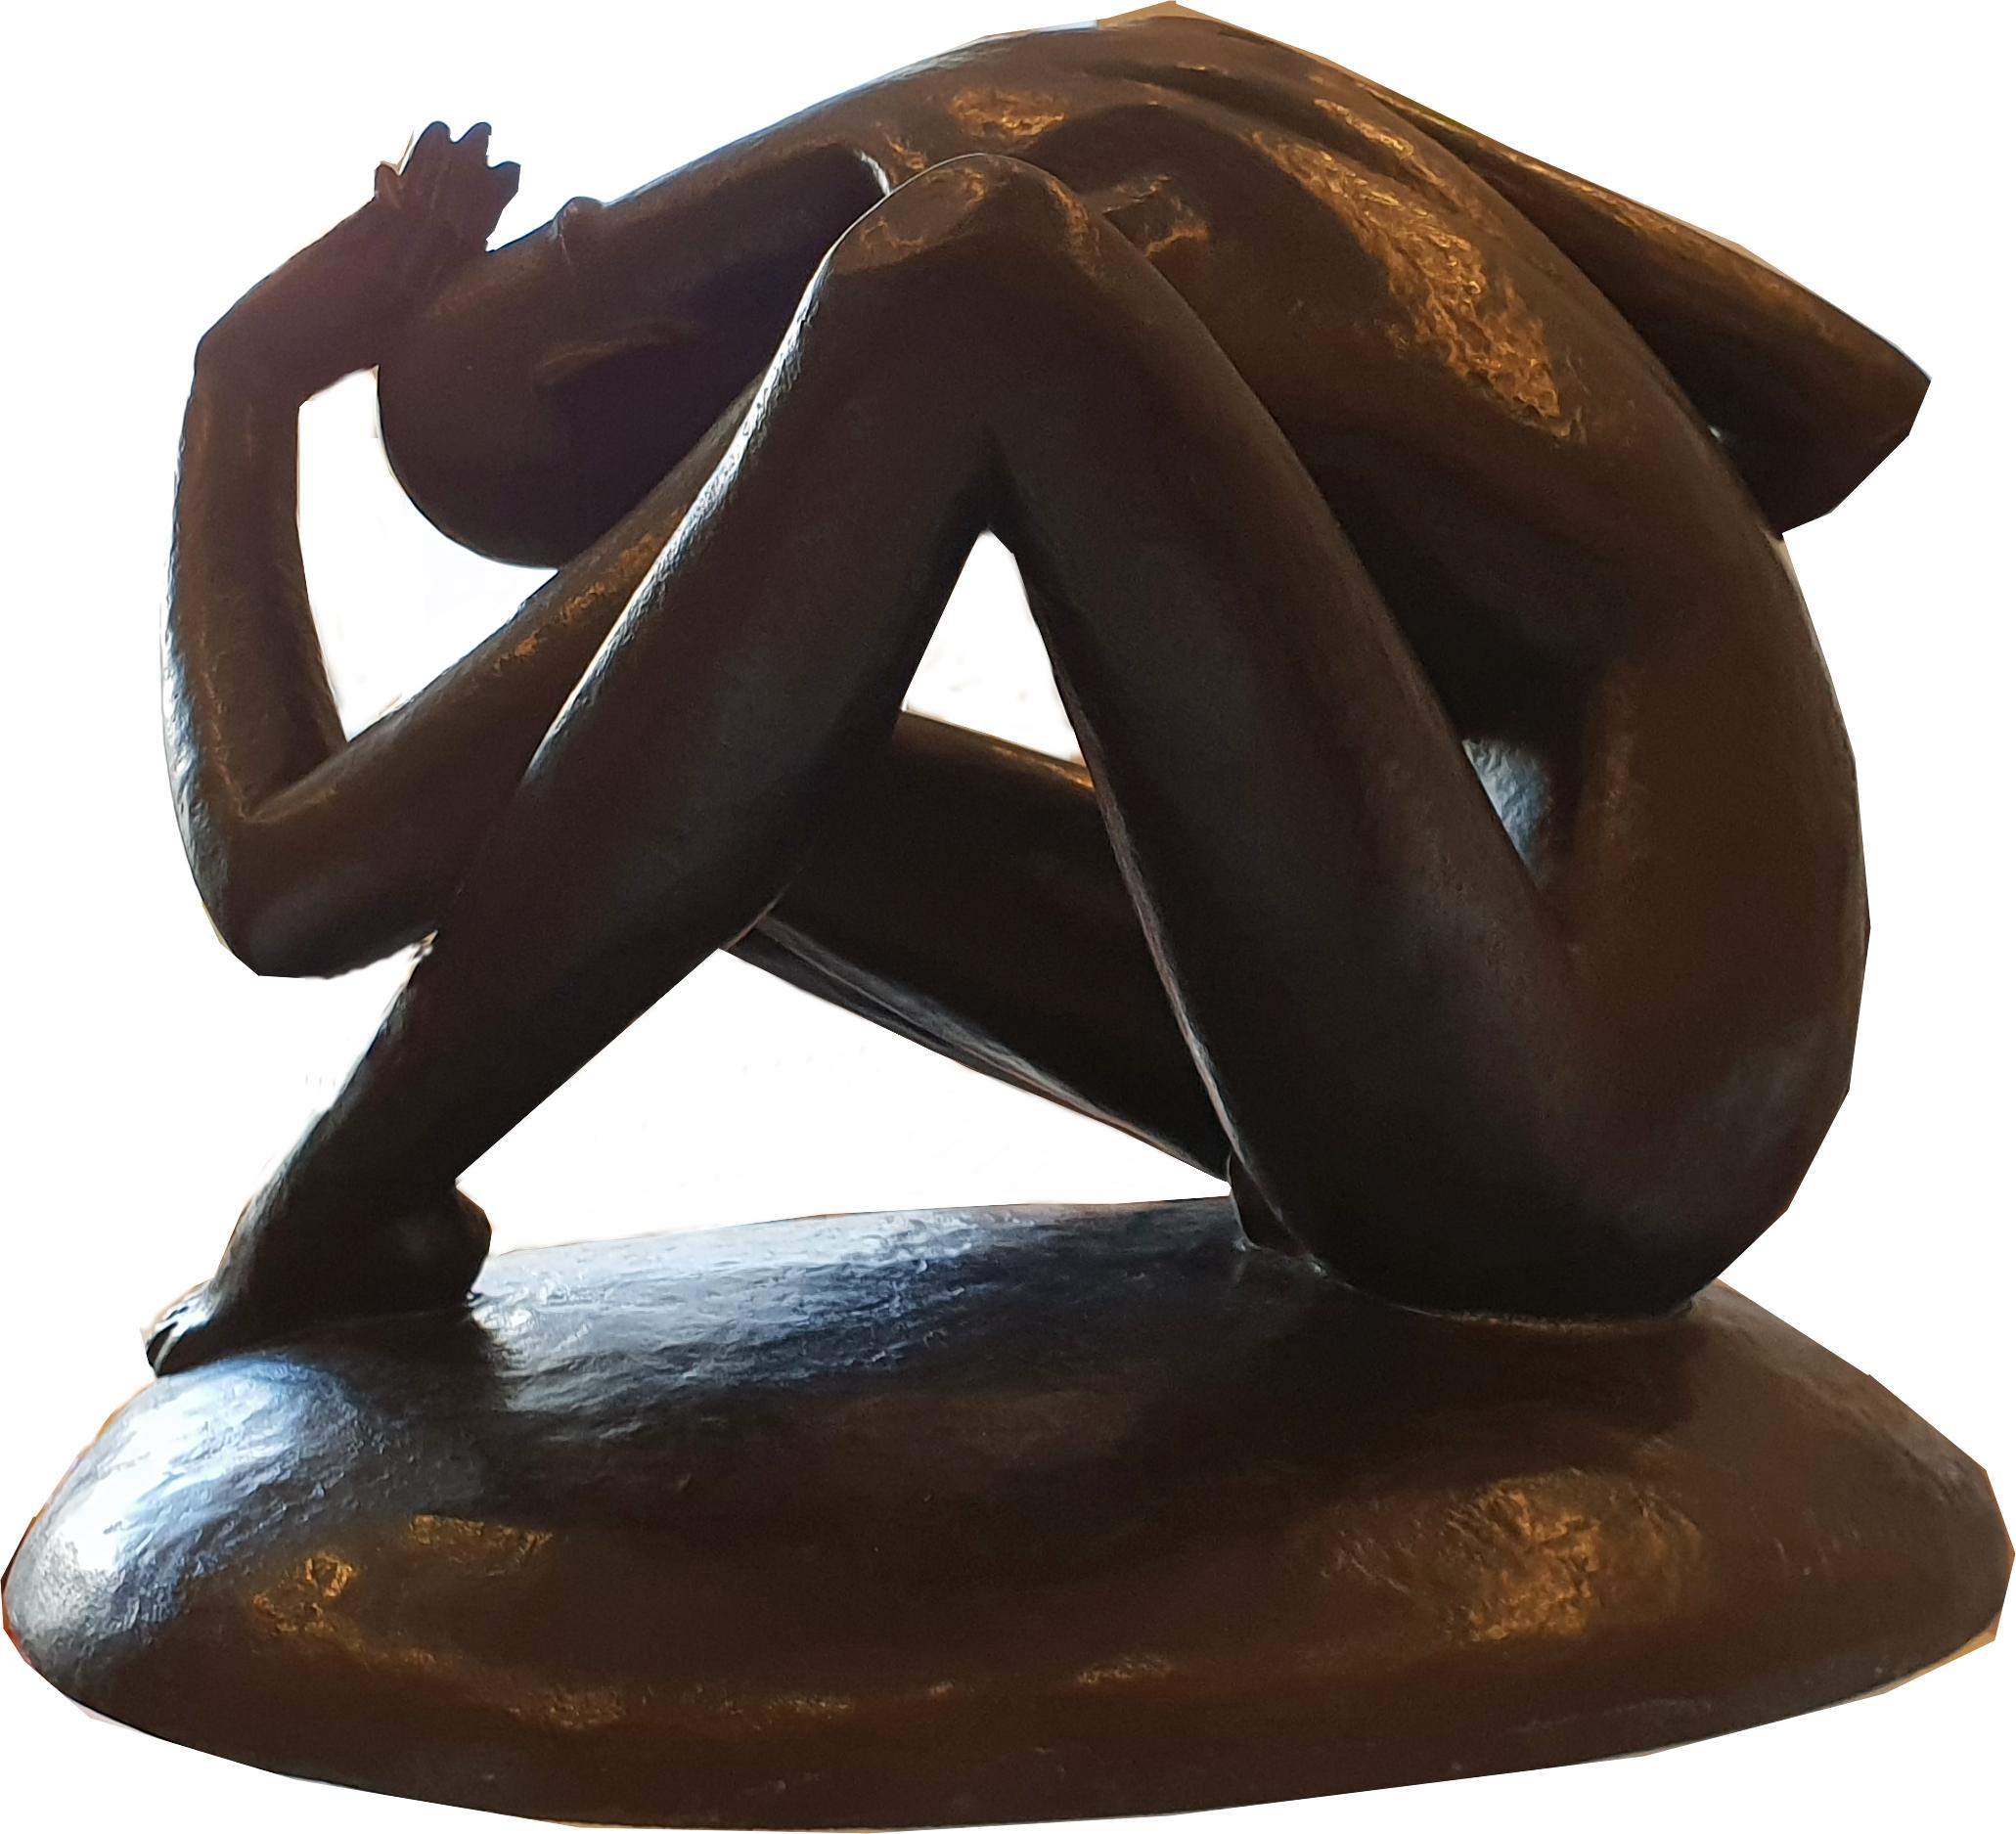 Male nude, circa 1925. Bronze, dark patinated. Early original cast by Noah, Berlin. Signed on the base: G. Schliepstein.
Measurements: Height: 12.99 in ( 33 cm ), Width: 15.75 in ( 42 cm ), Depth: 12.2 in ( 31 cm ).